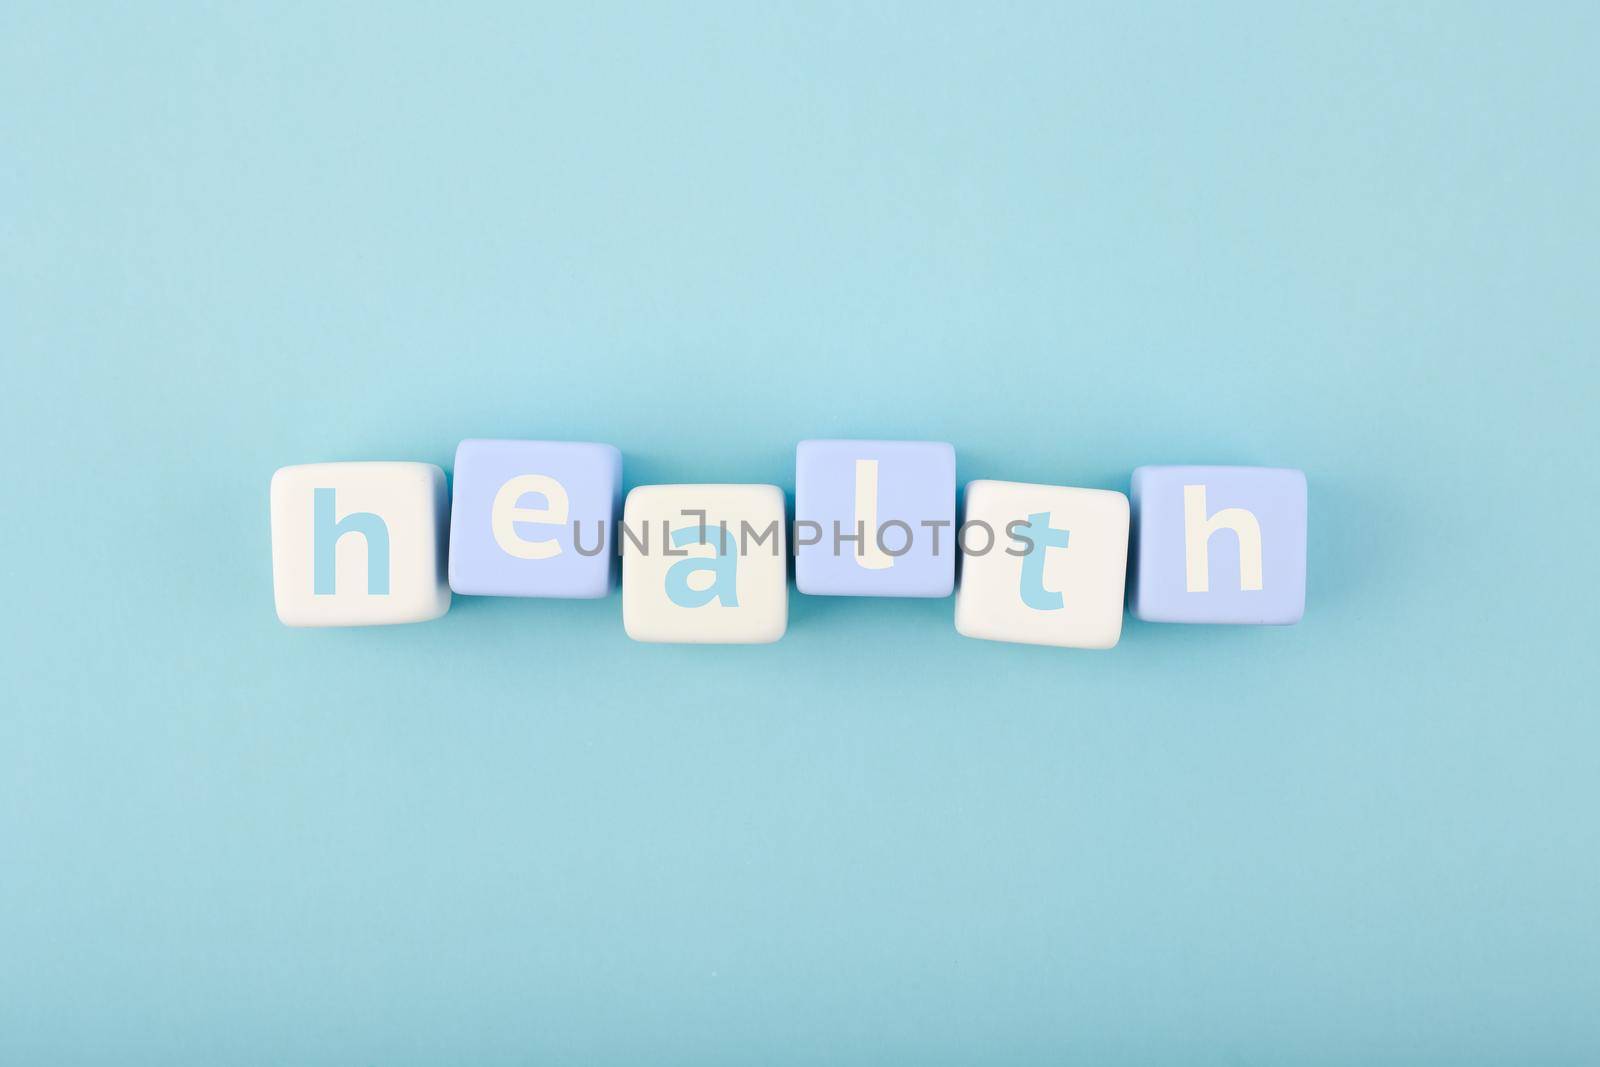 Health single word written on white and blue cubes in a row on bright blue background. Concept of mental and physical health, medications, life insurance or wellbeing